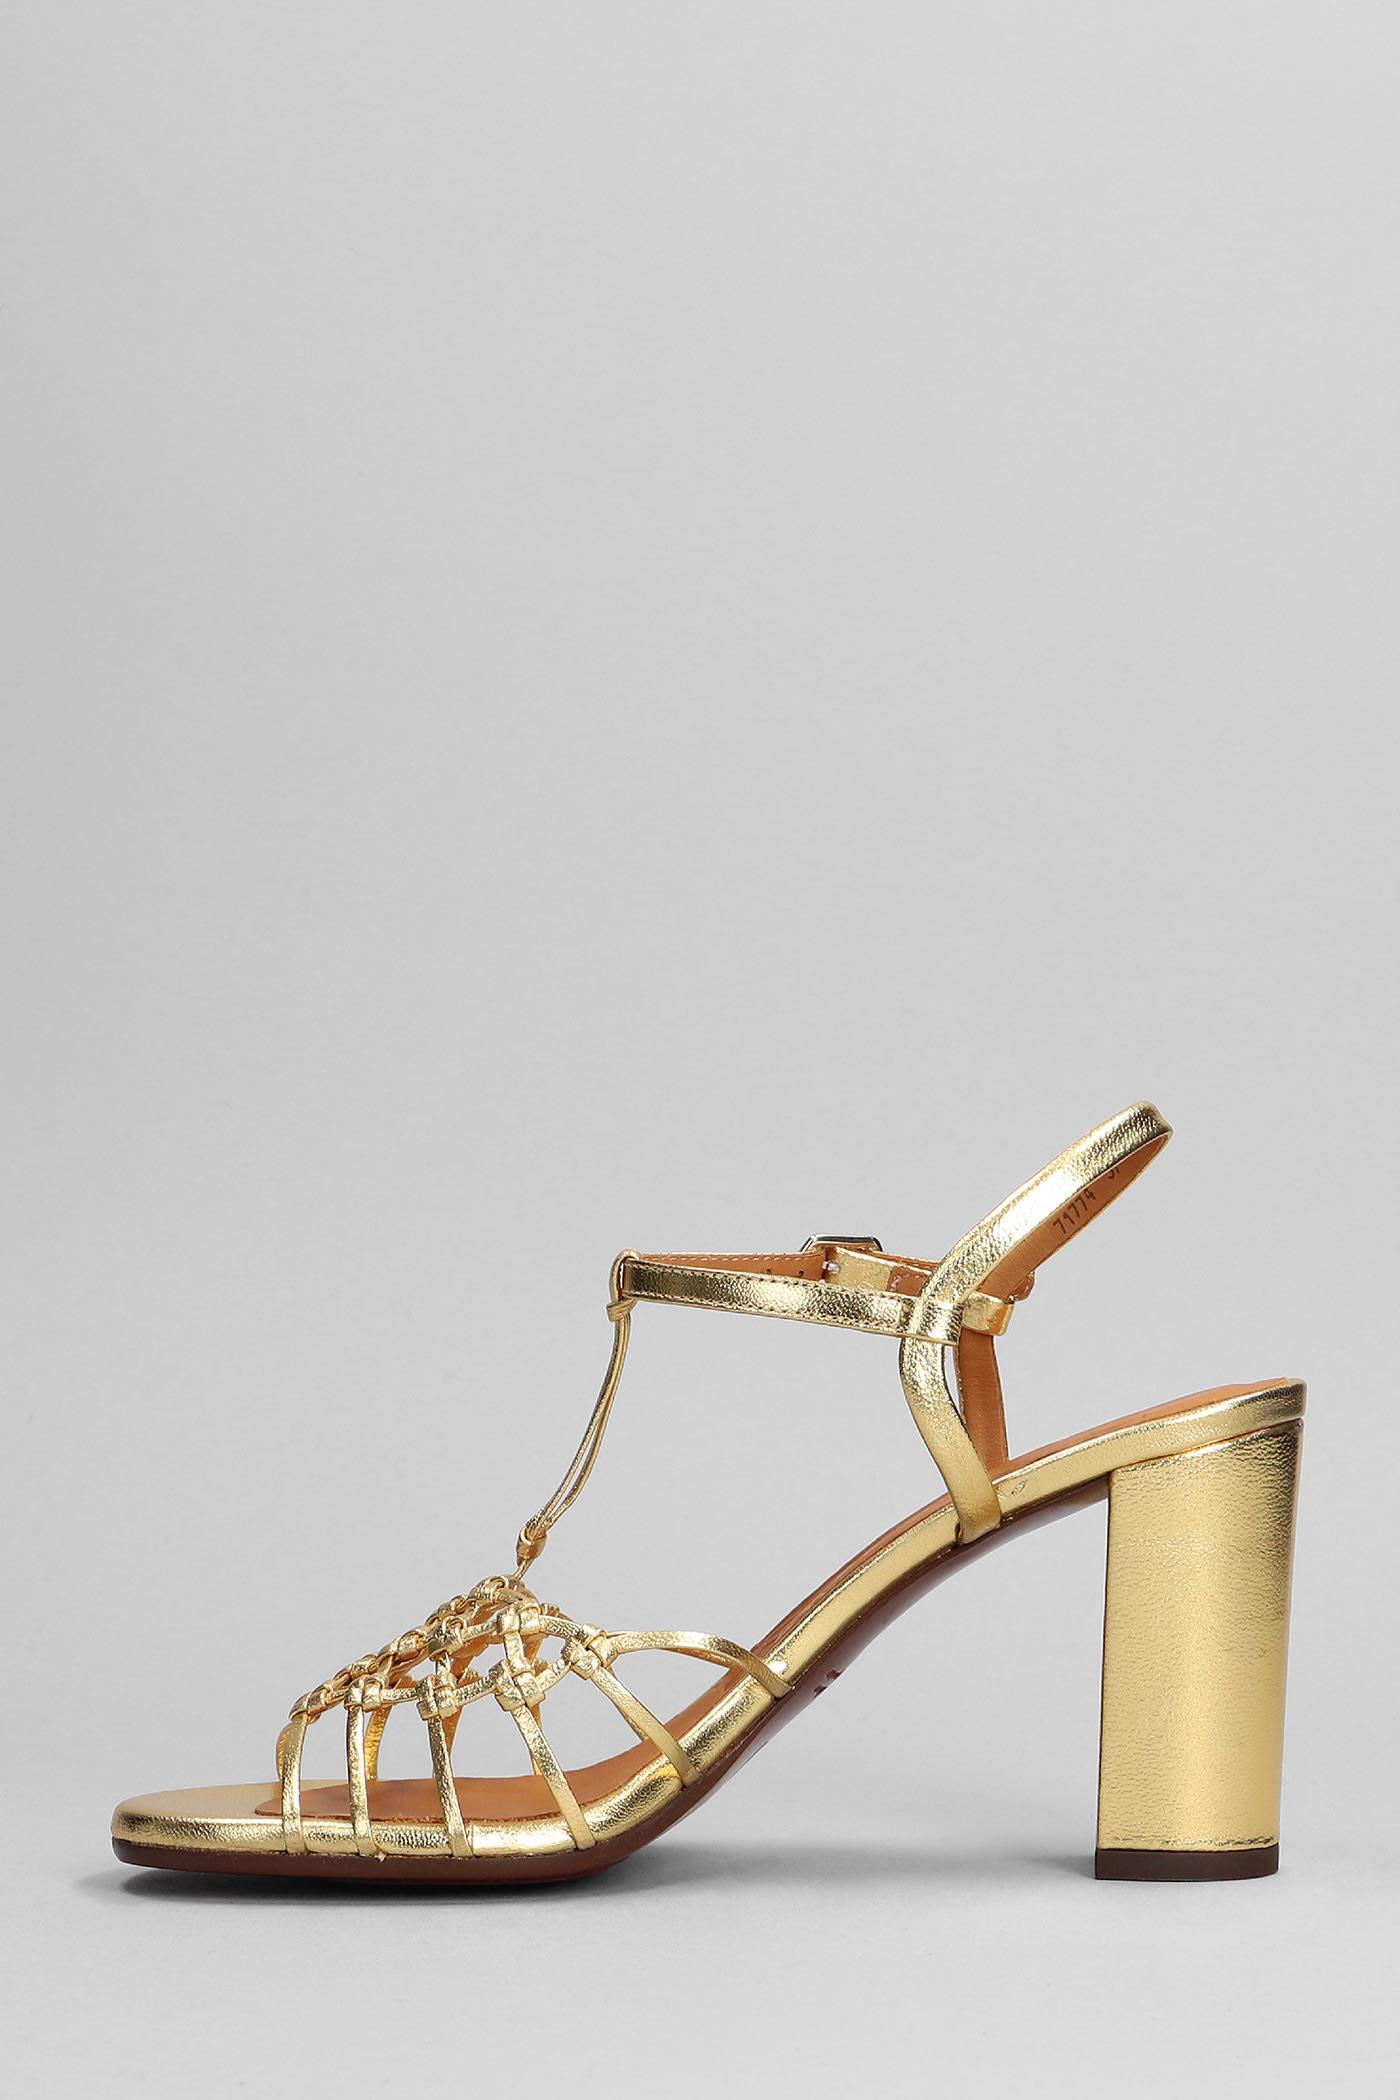 Chie Mihara Bassi Sandals In Gold Leather in Metallic | Lyst